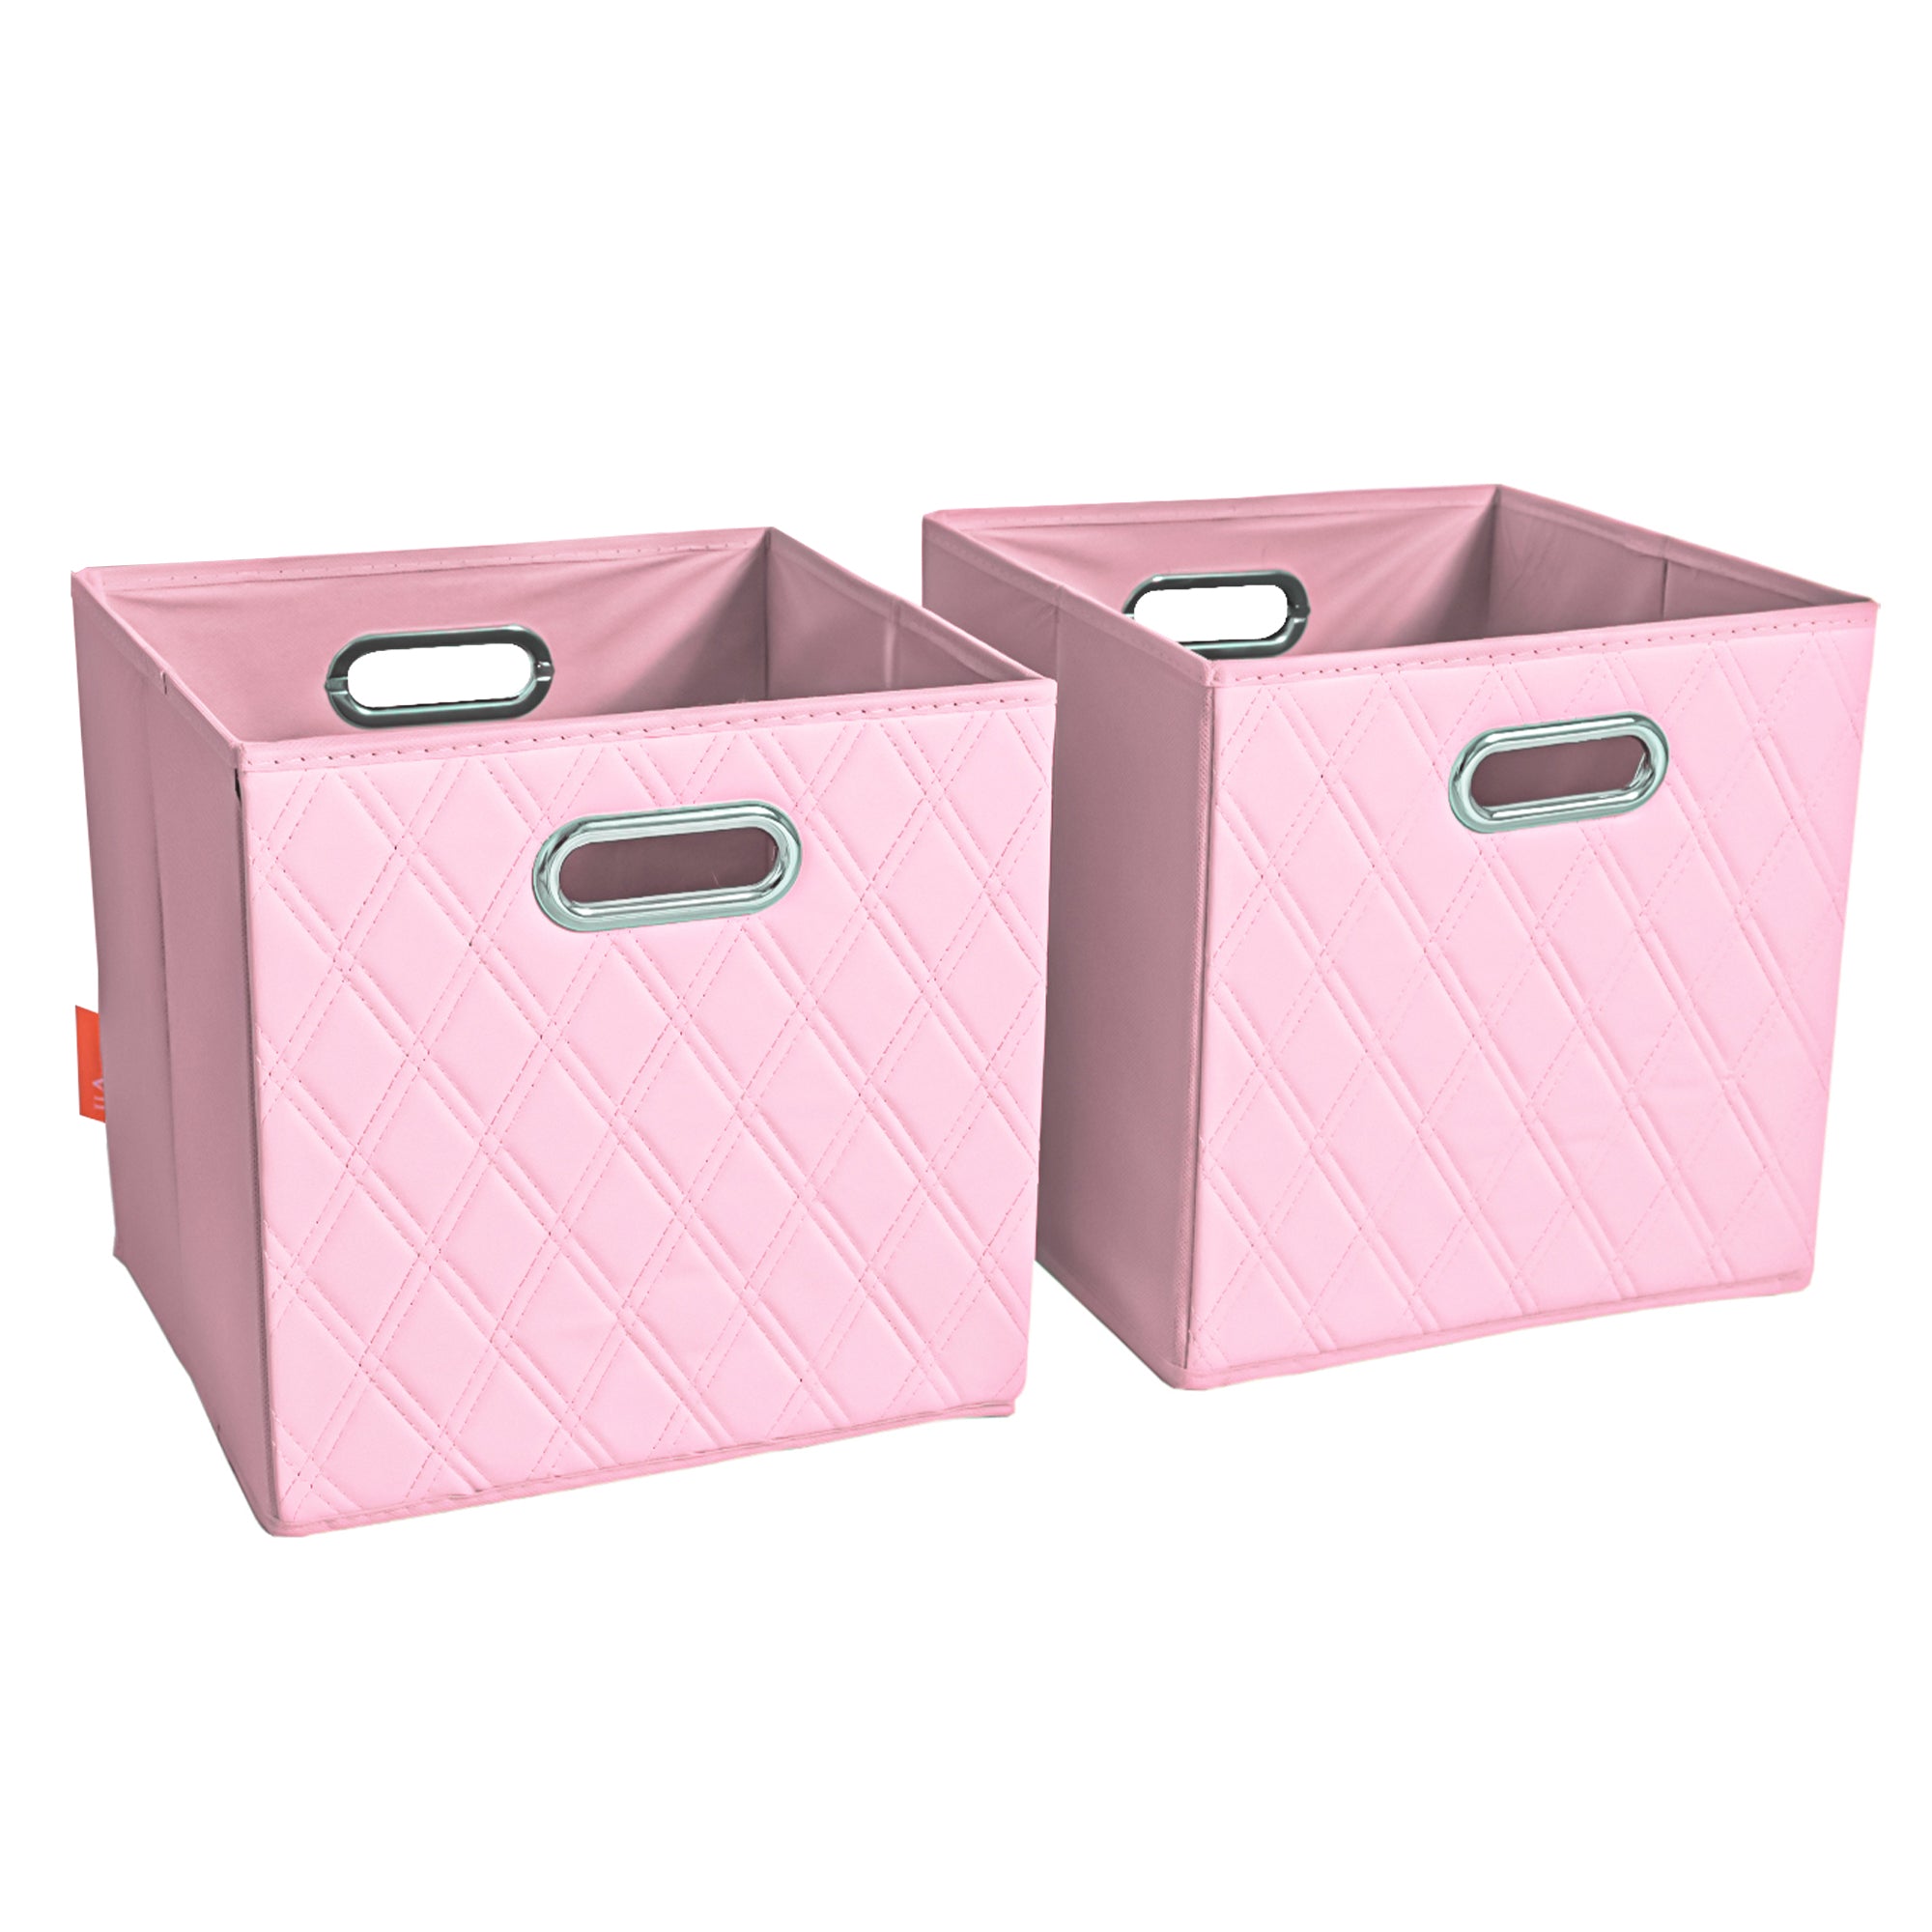 JIAessentials 12 inch Foldable Diamond Patterned Faux Leather Storage Cube Bins Set of Two with Dual Handles - 12" Pink